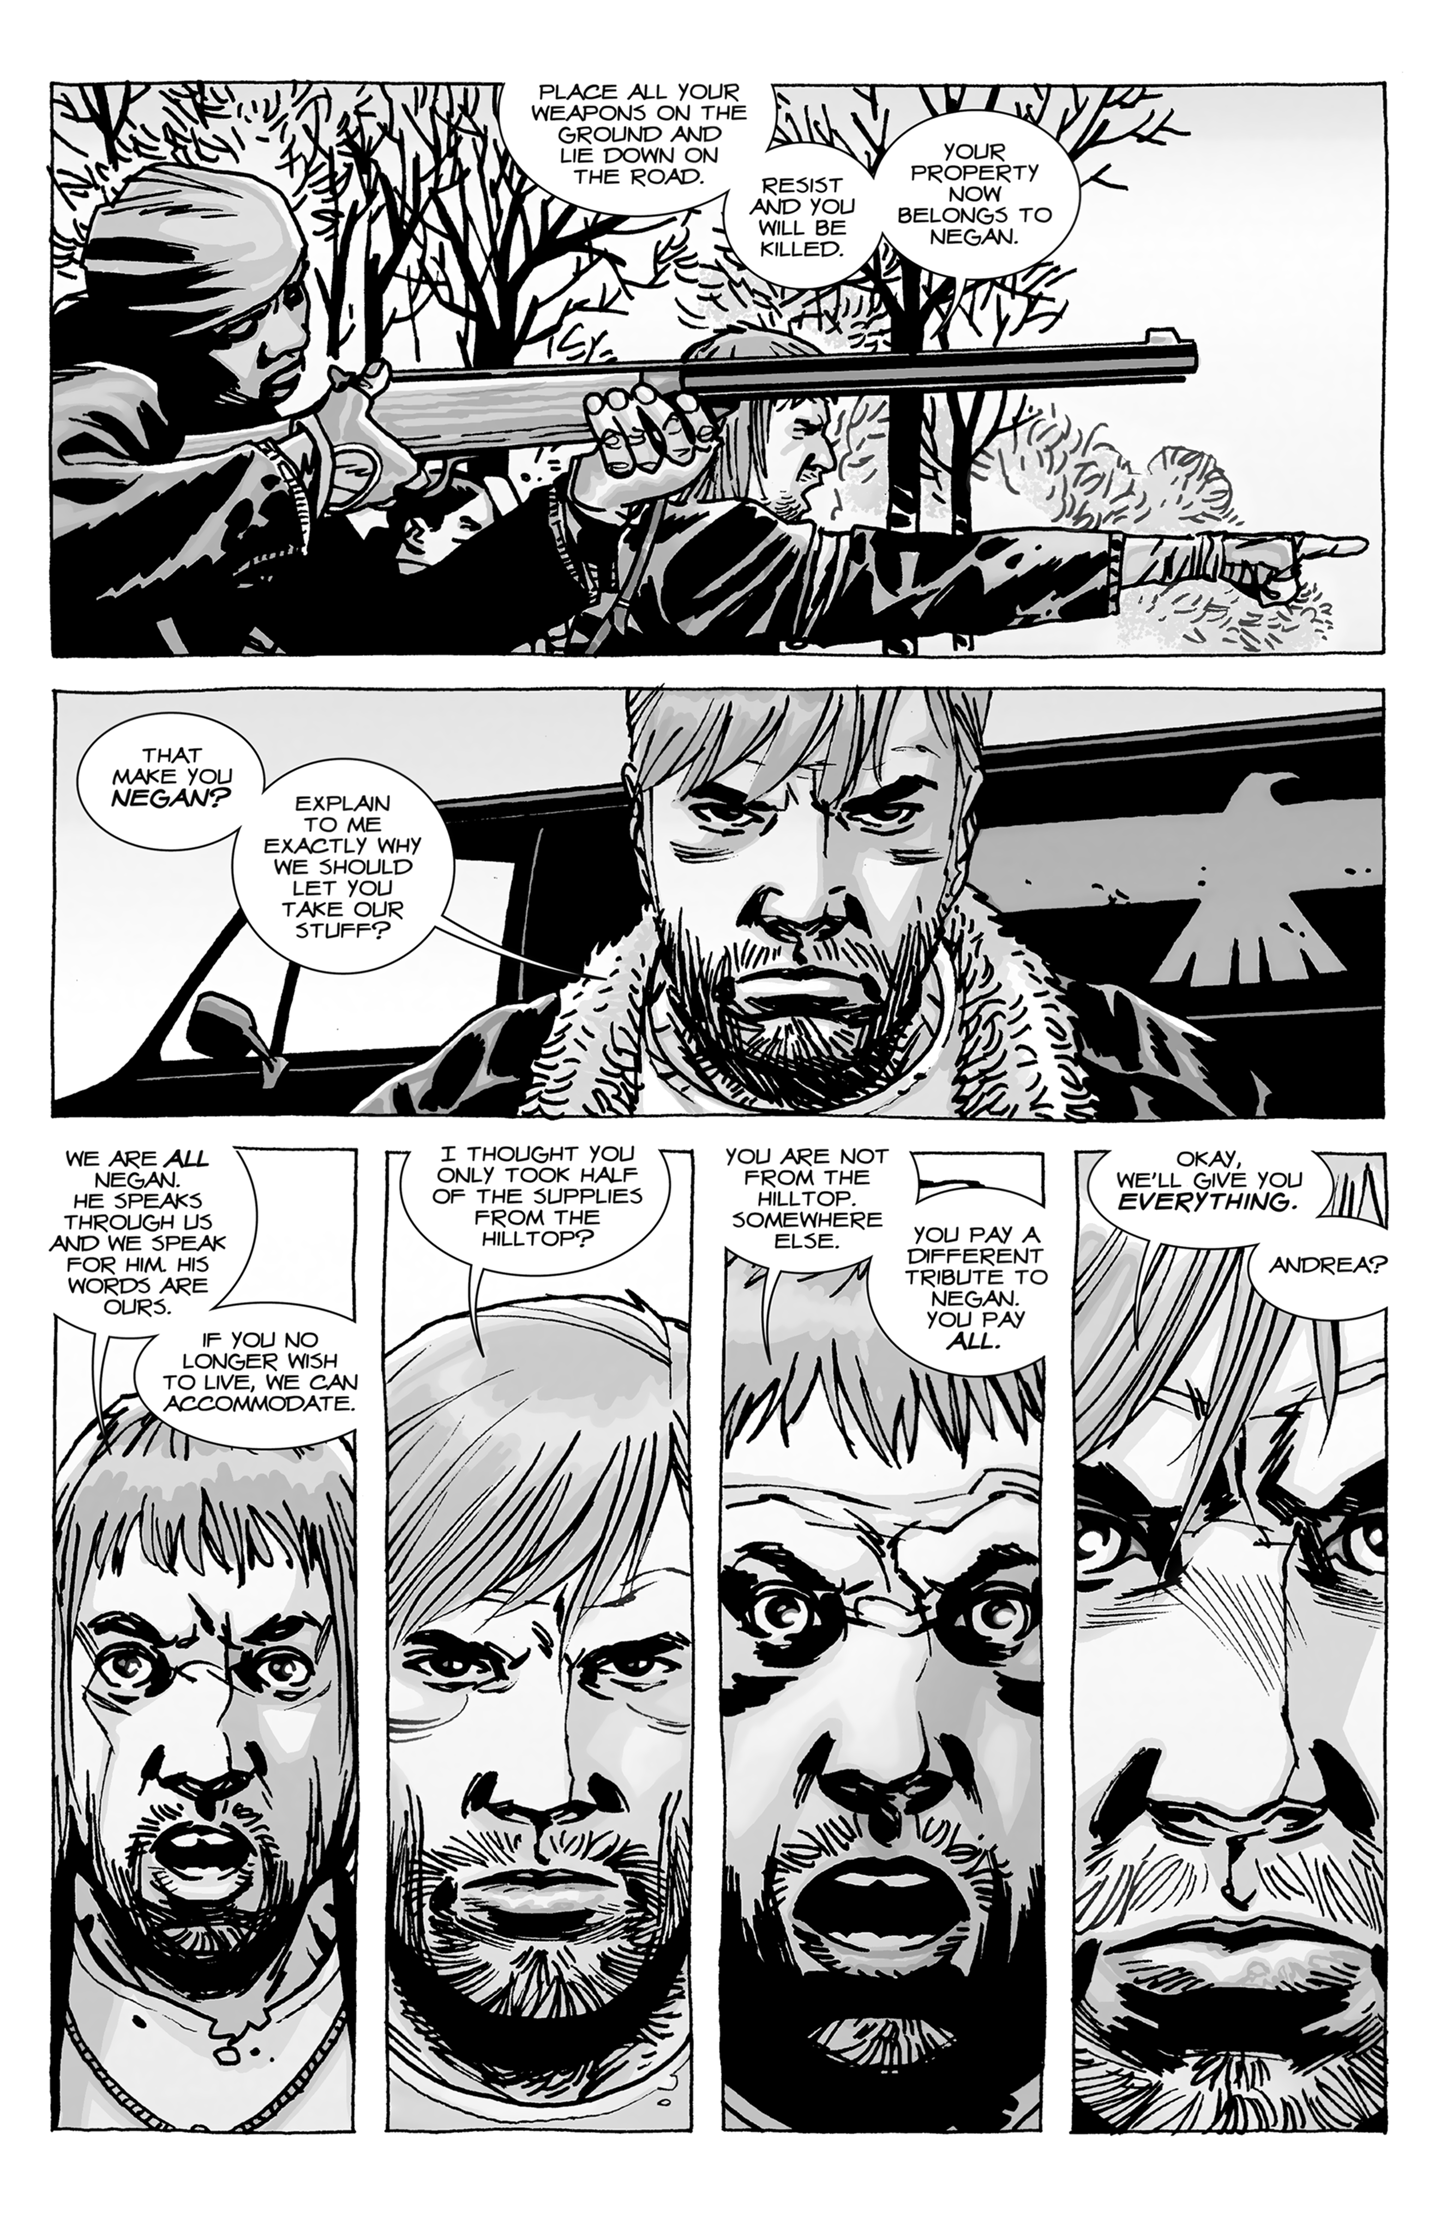 THE WALKING DEAD 97 - SOMETHING TO FEAR, Part One